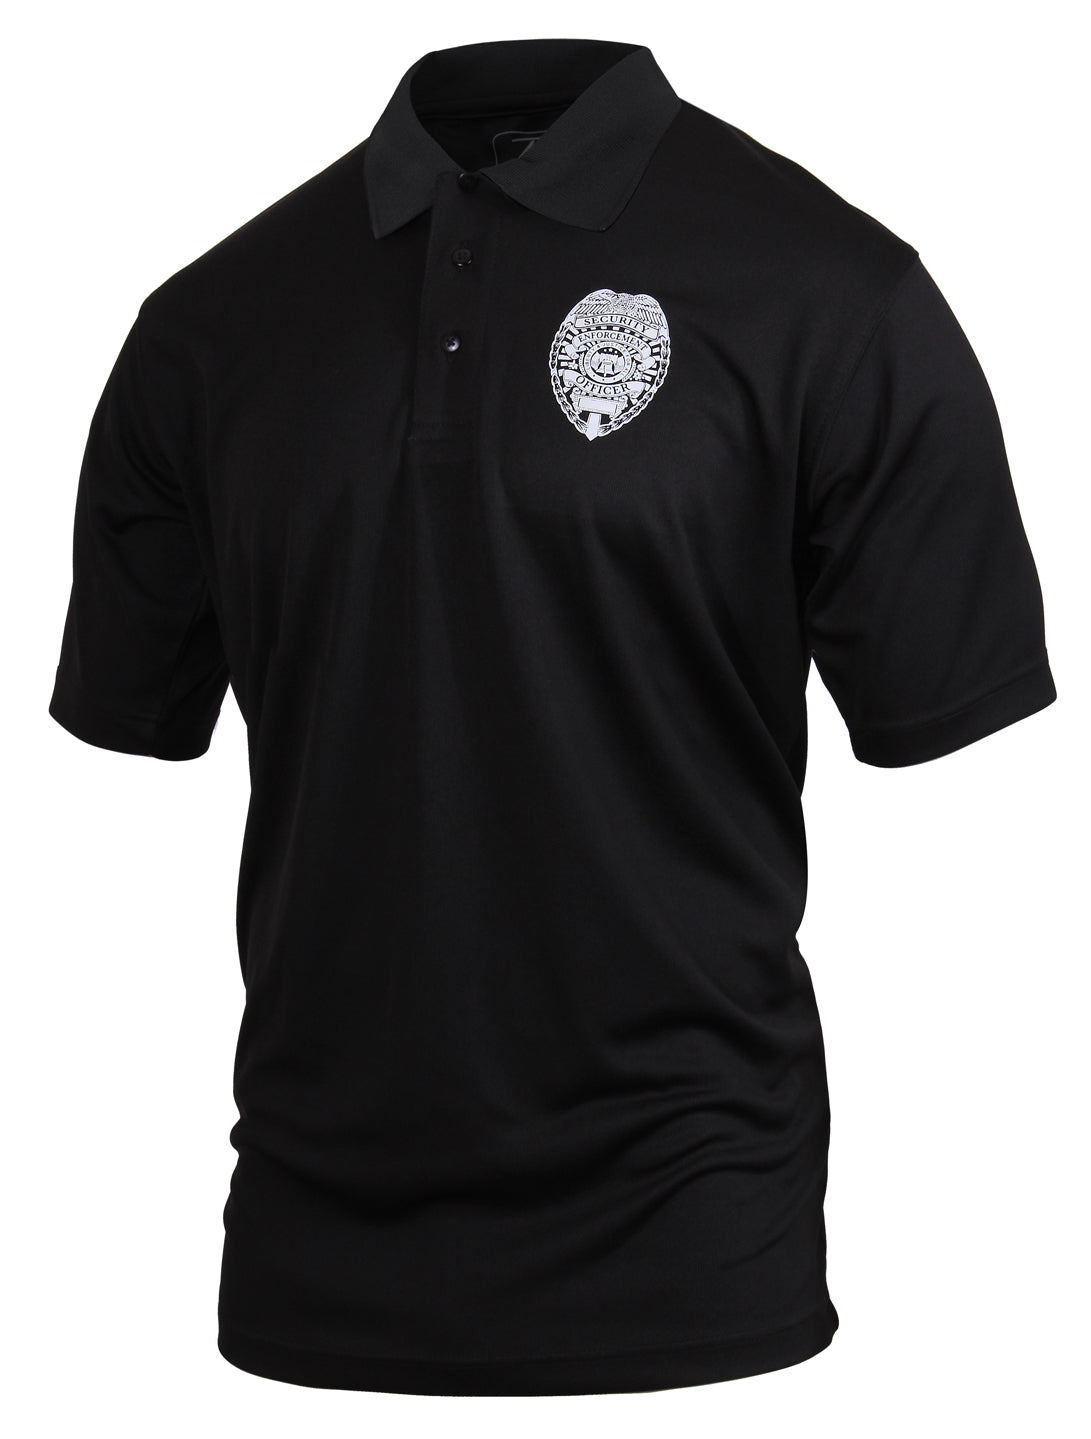 Rothco Quick Dry Performance Security T-Shirt - Tactical Choice Plus